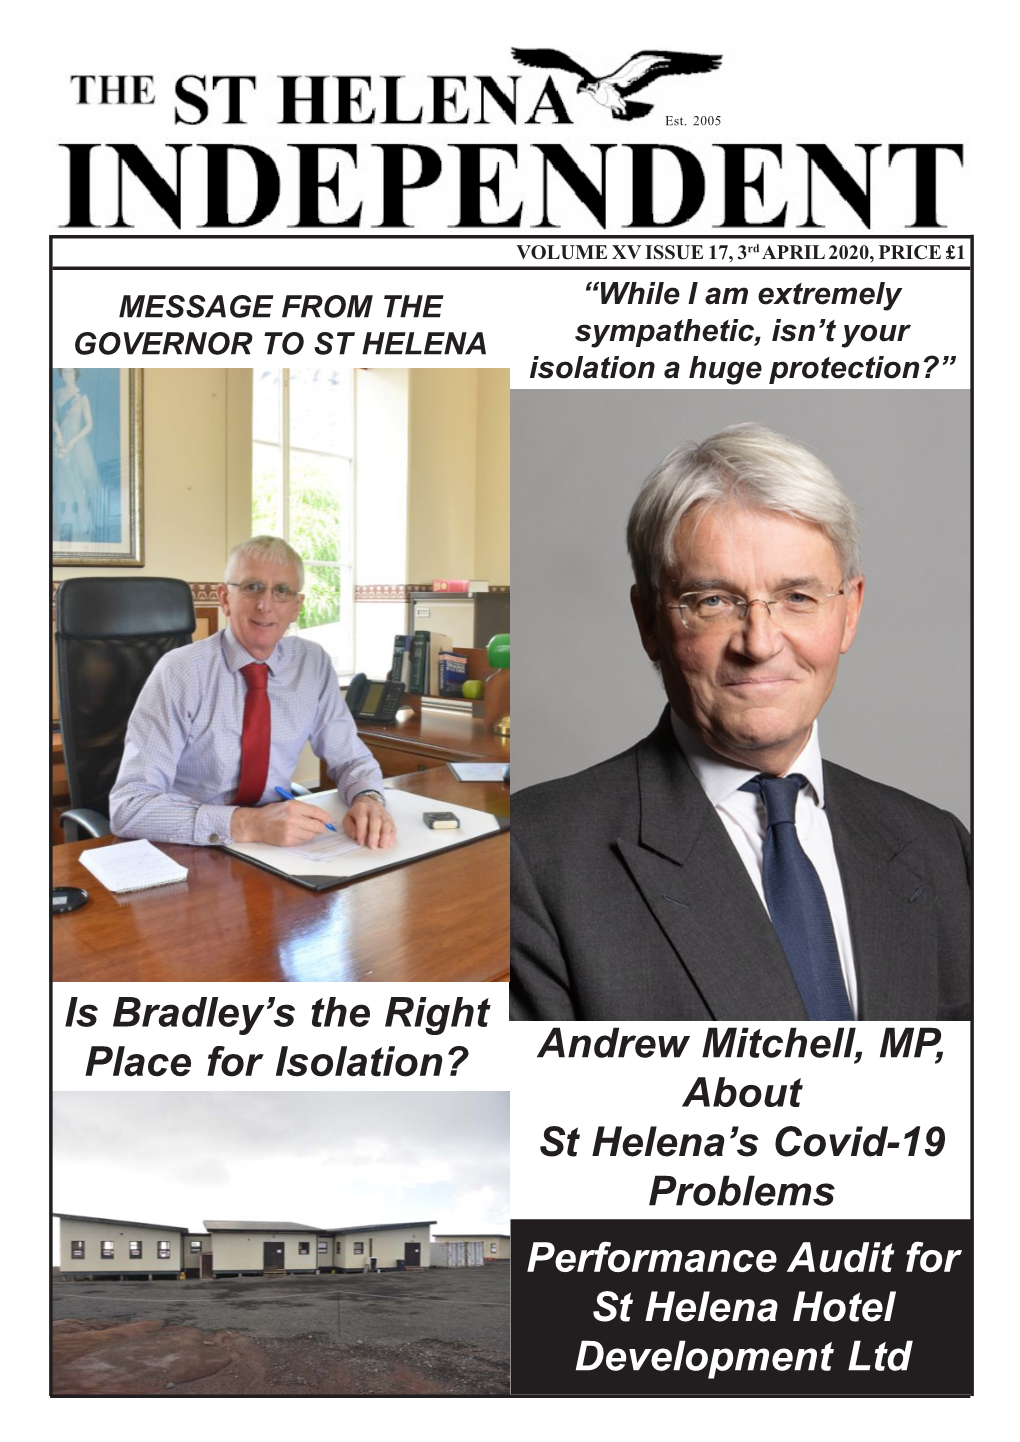 Andrew Mitchell, MP, About St Helena's